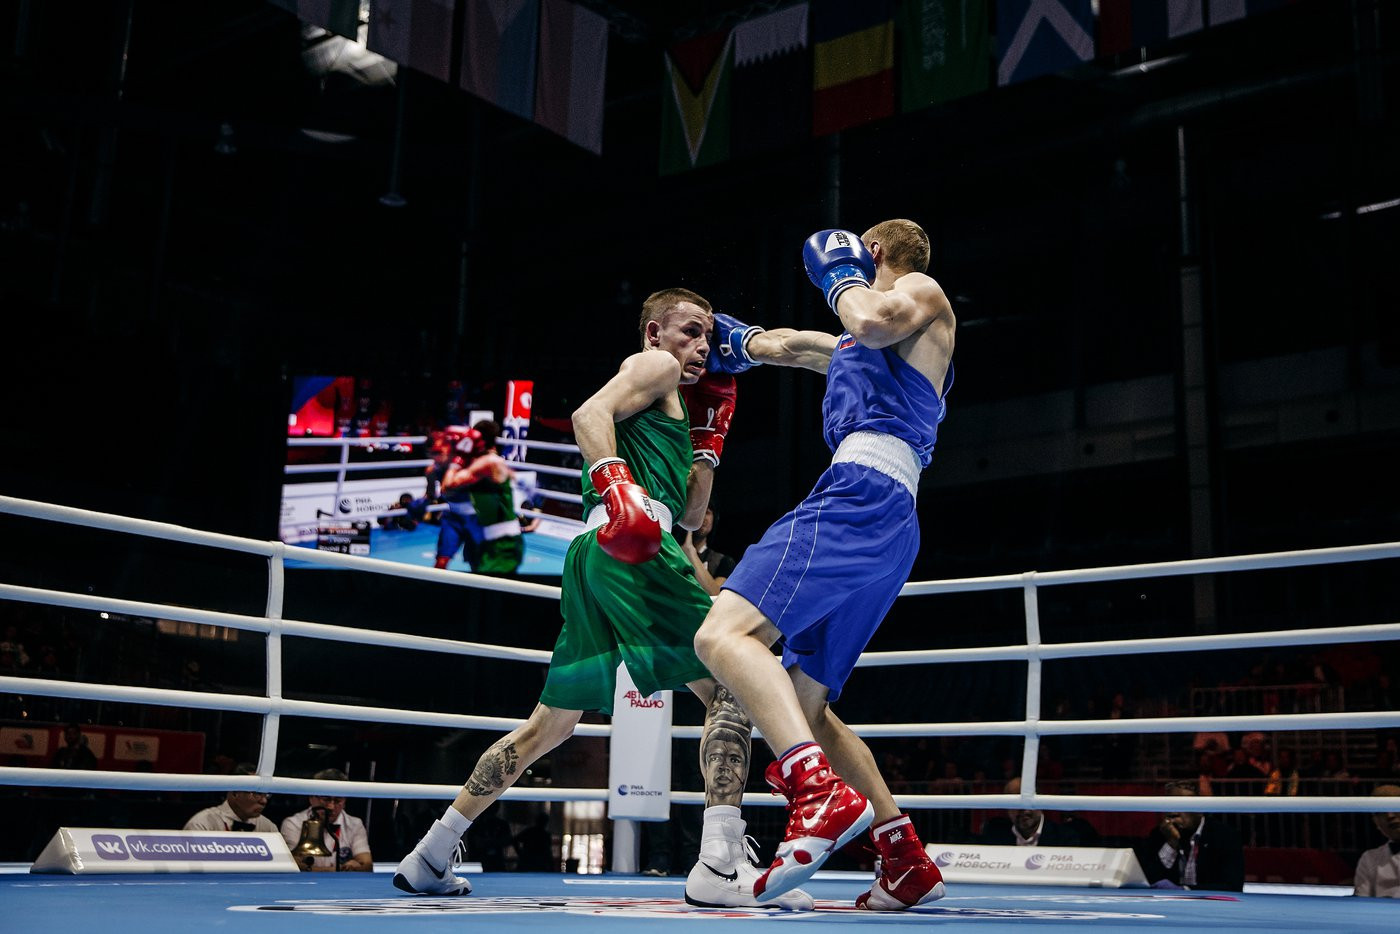 Another victory went to Russia when Ilia Popov fought Australia's Harry Garside ©Yekaterinburg 2019